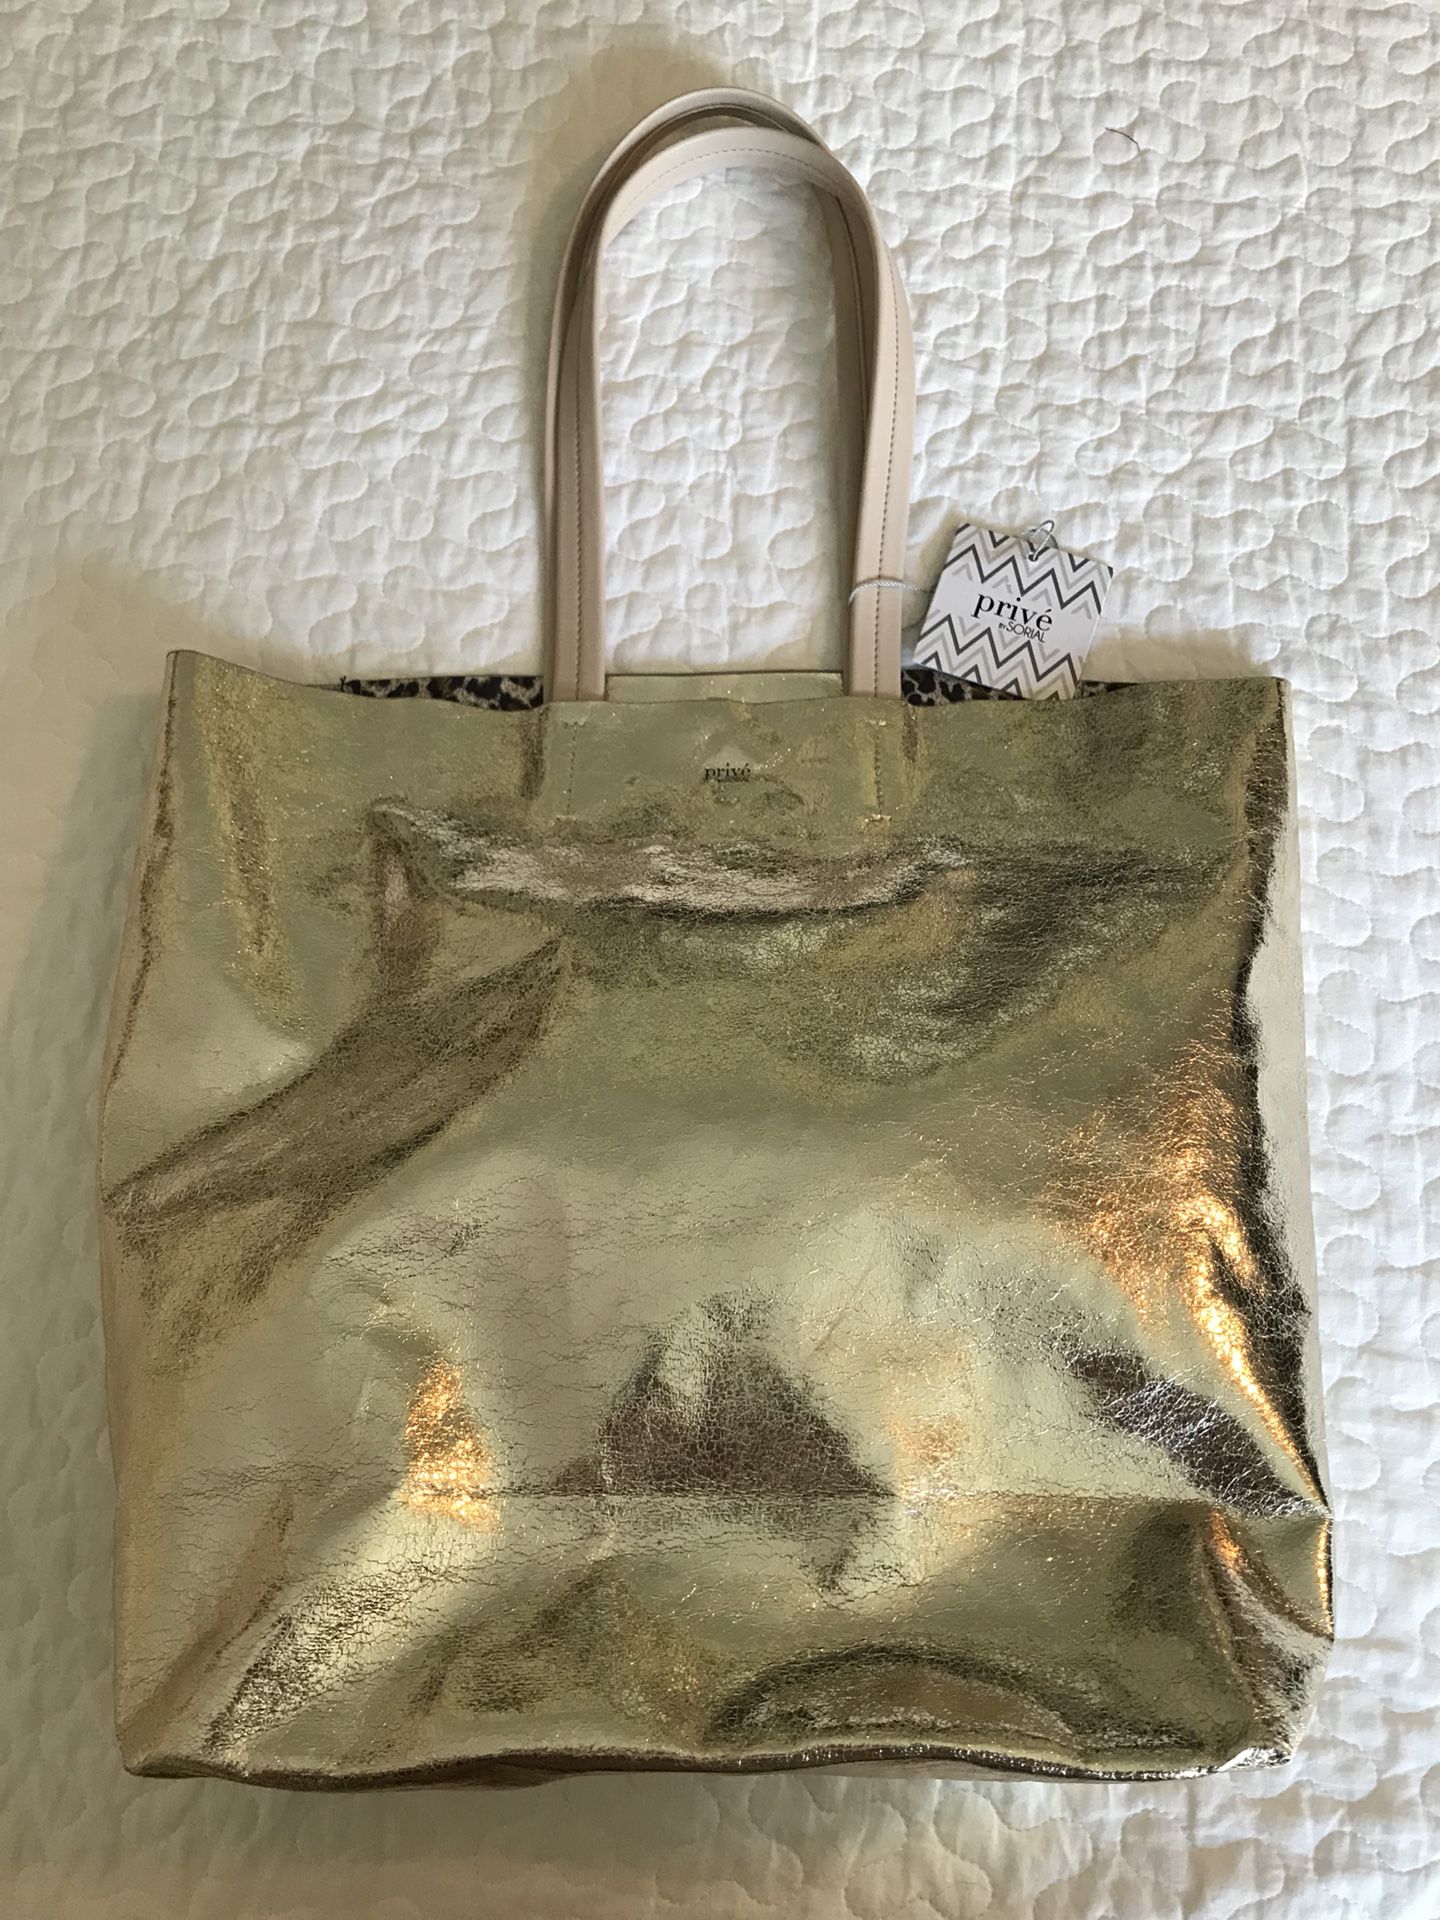 Charlotte Large Saffiano Leather Top-Zip Tote Bag' for Sale in Kingsville,  OH - OfferUp